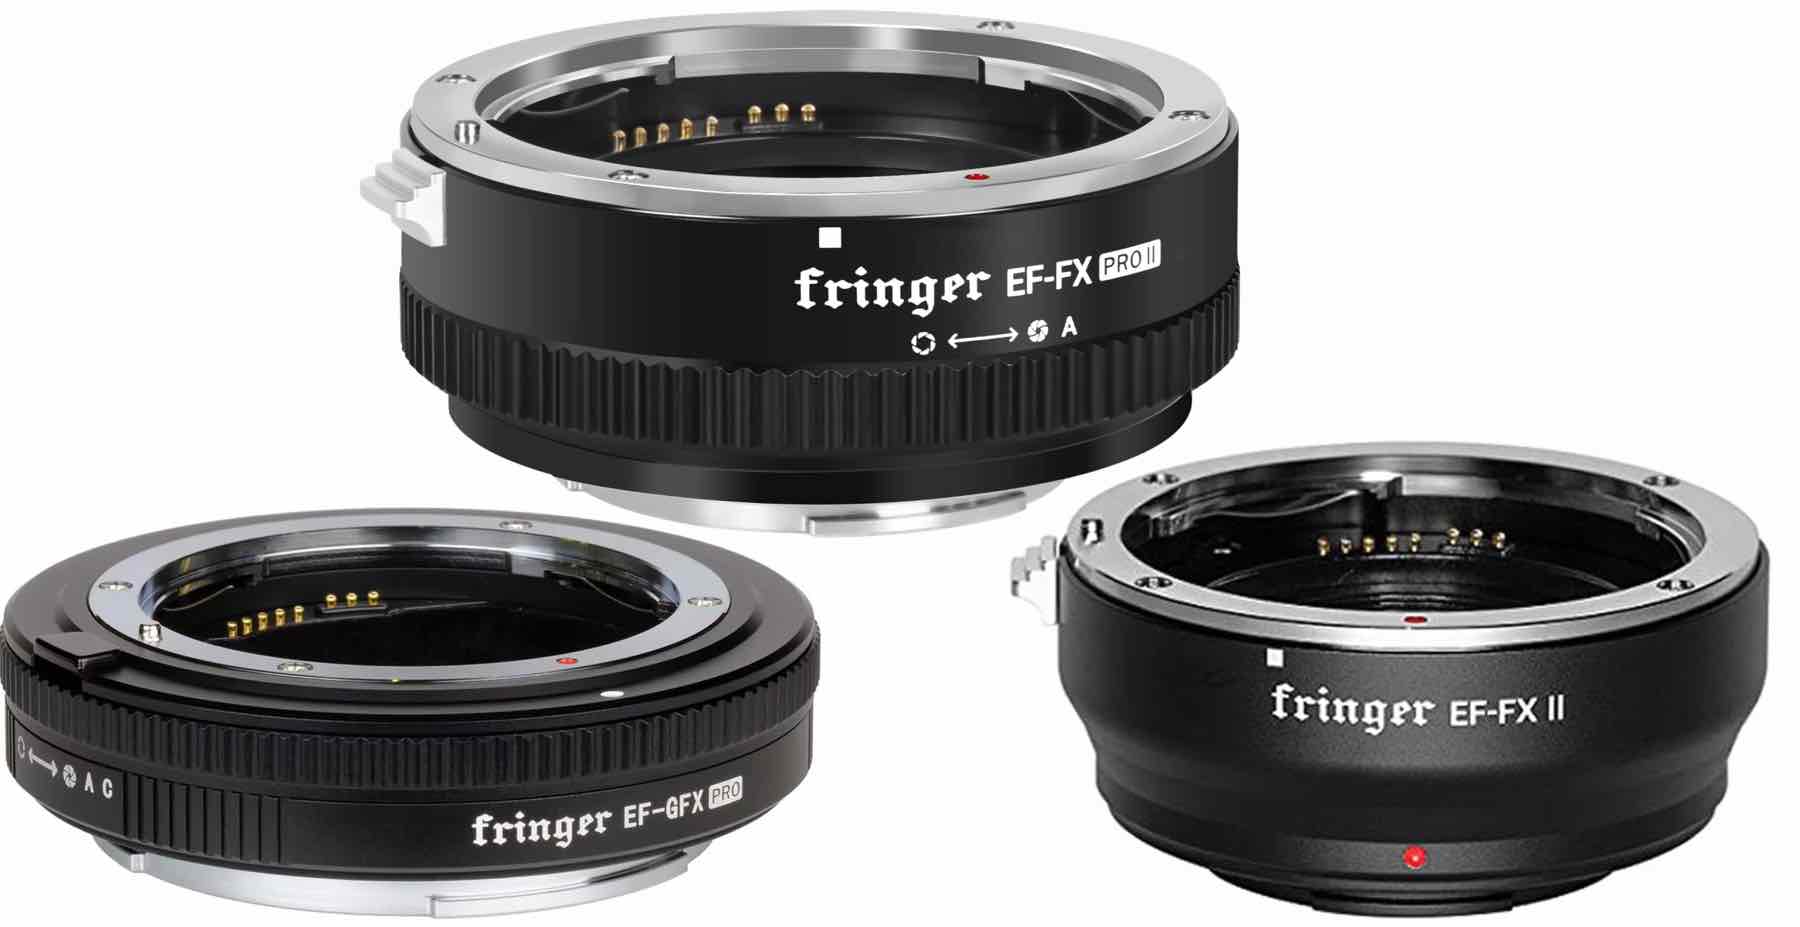 Fringer EF-GFX and EF-FX (Pro) II Firmware Updates Released and 